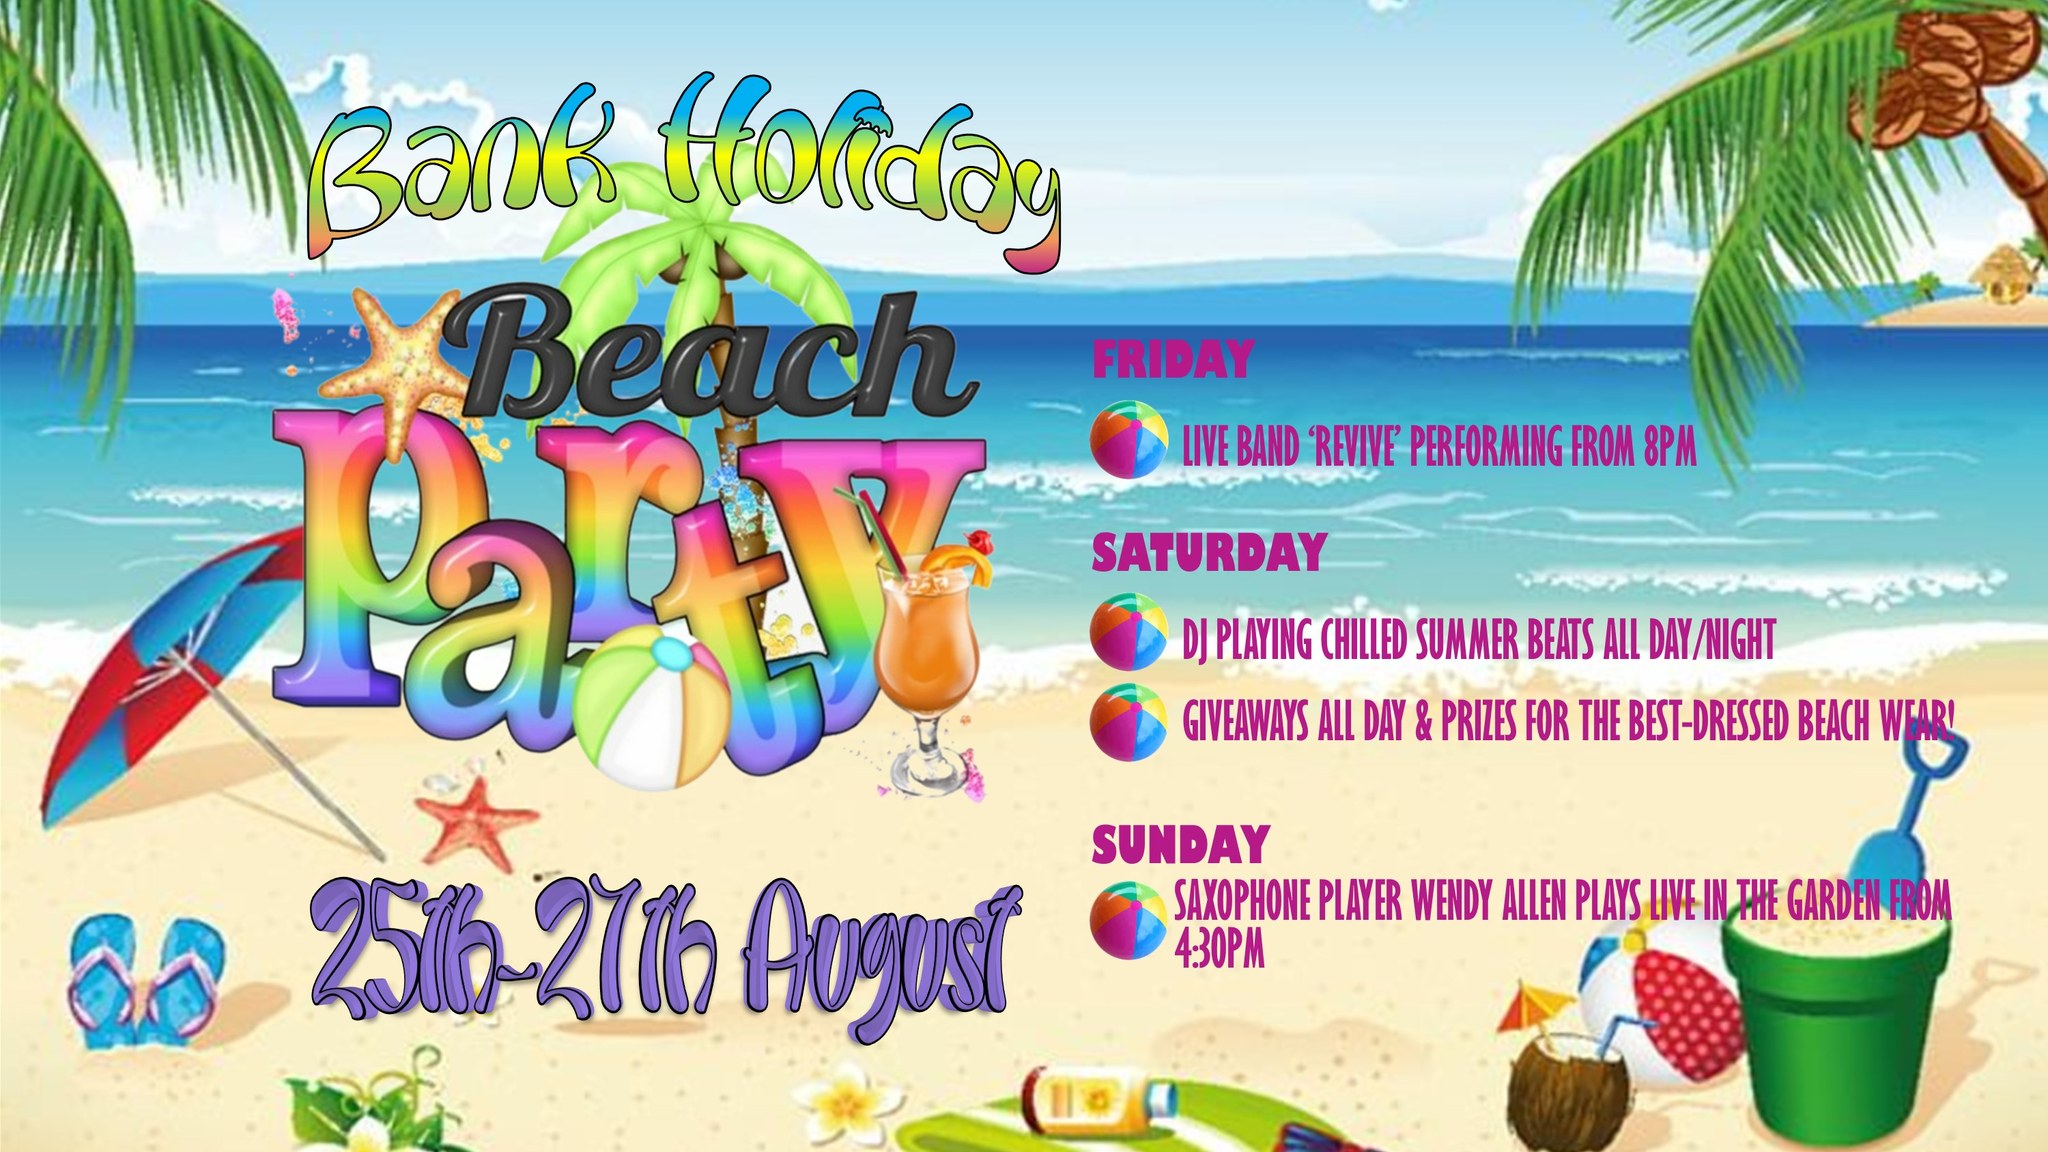 Bank Holiday Beach Party: live band REVIVE